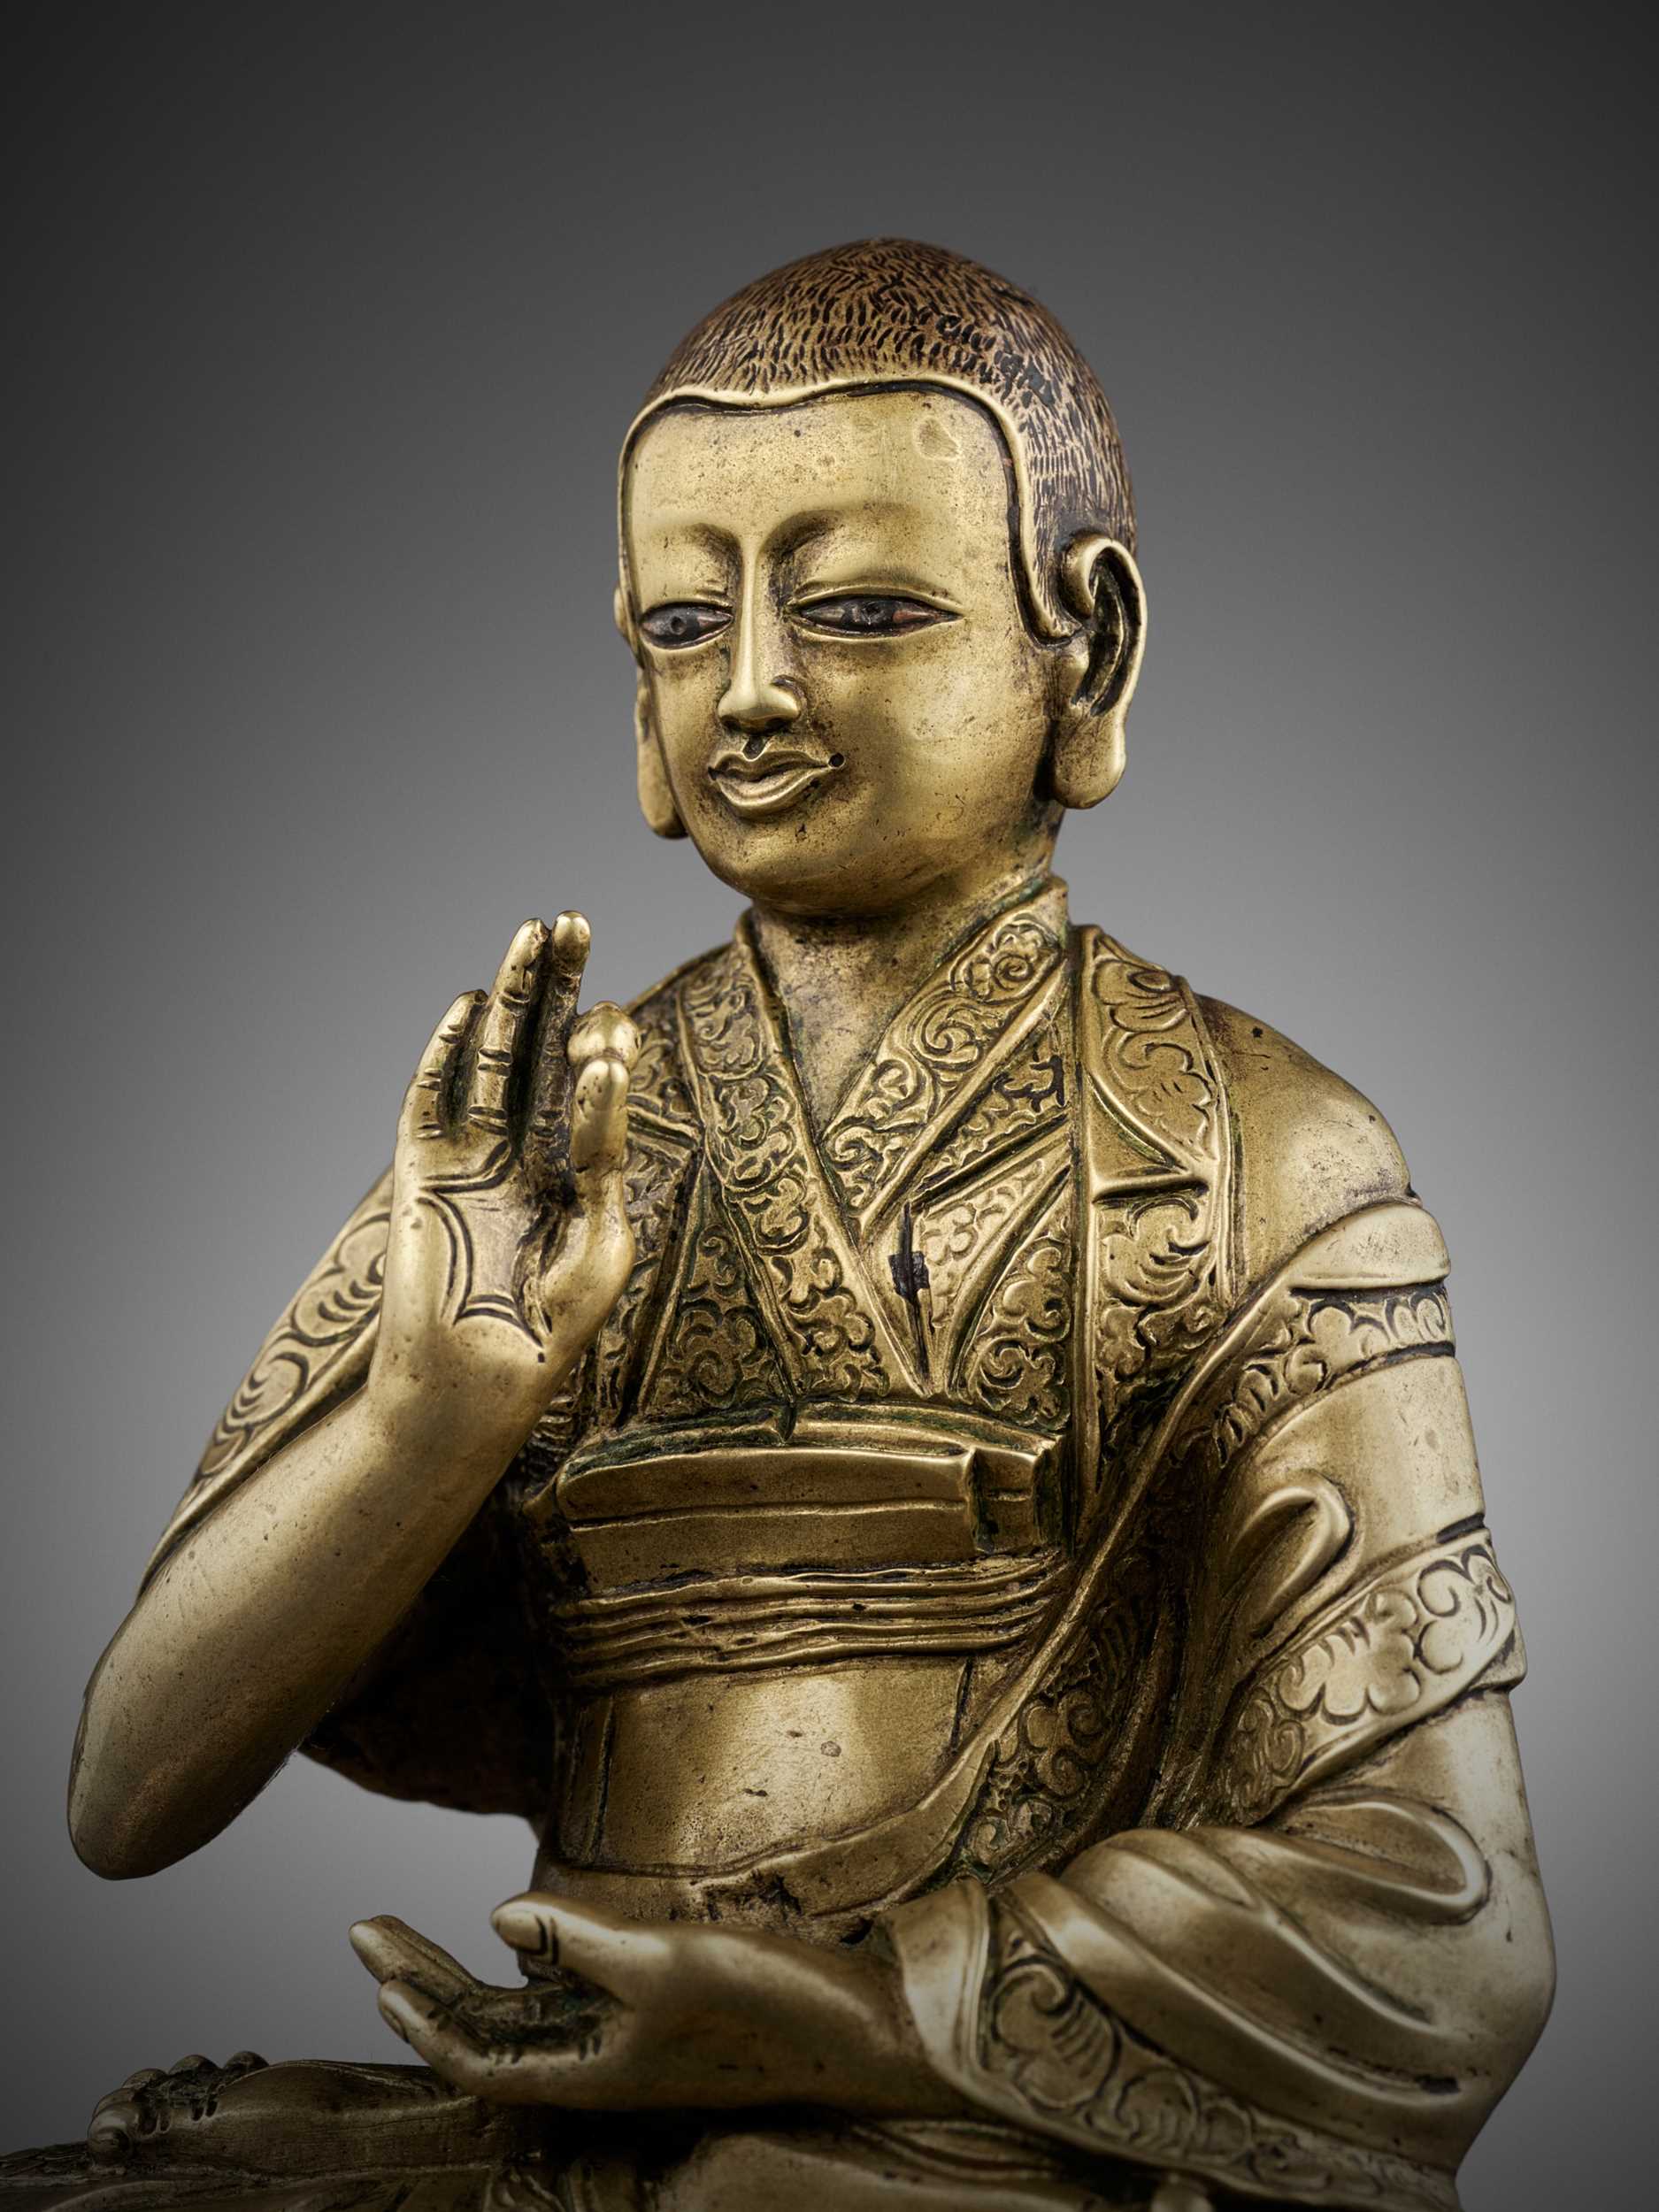 Lot 391 - A SILVER-INLAID BRONZE FIGURE OF LOWO KHENCHEN SONAM LHUNDRUP, ABBOT OF THE KINGDOM OF LO